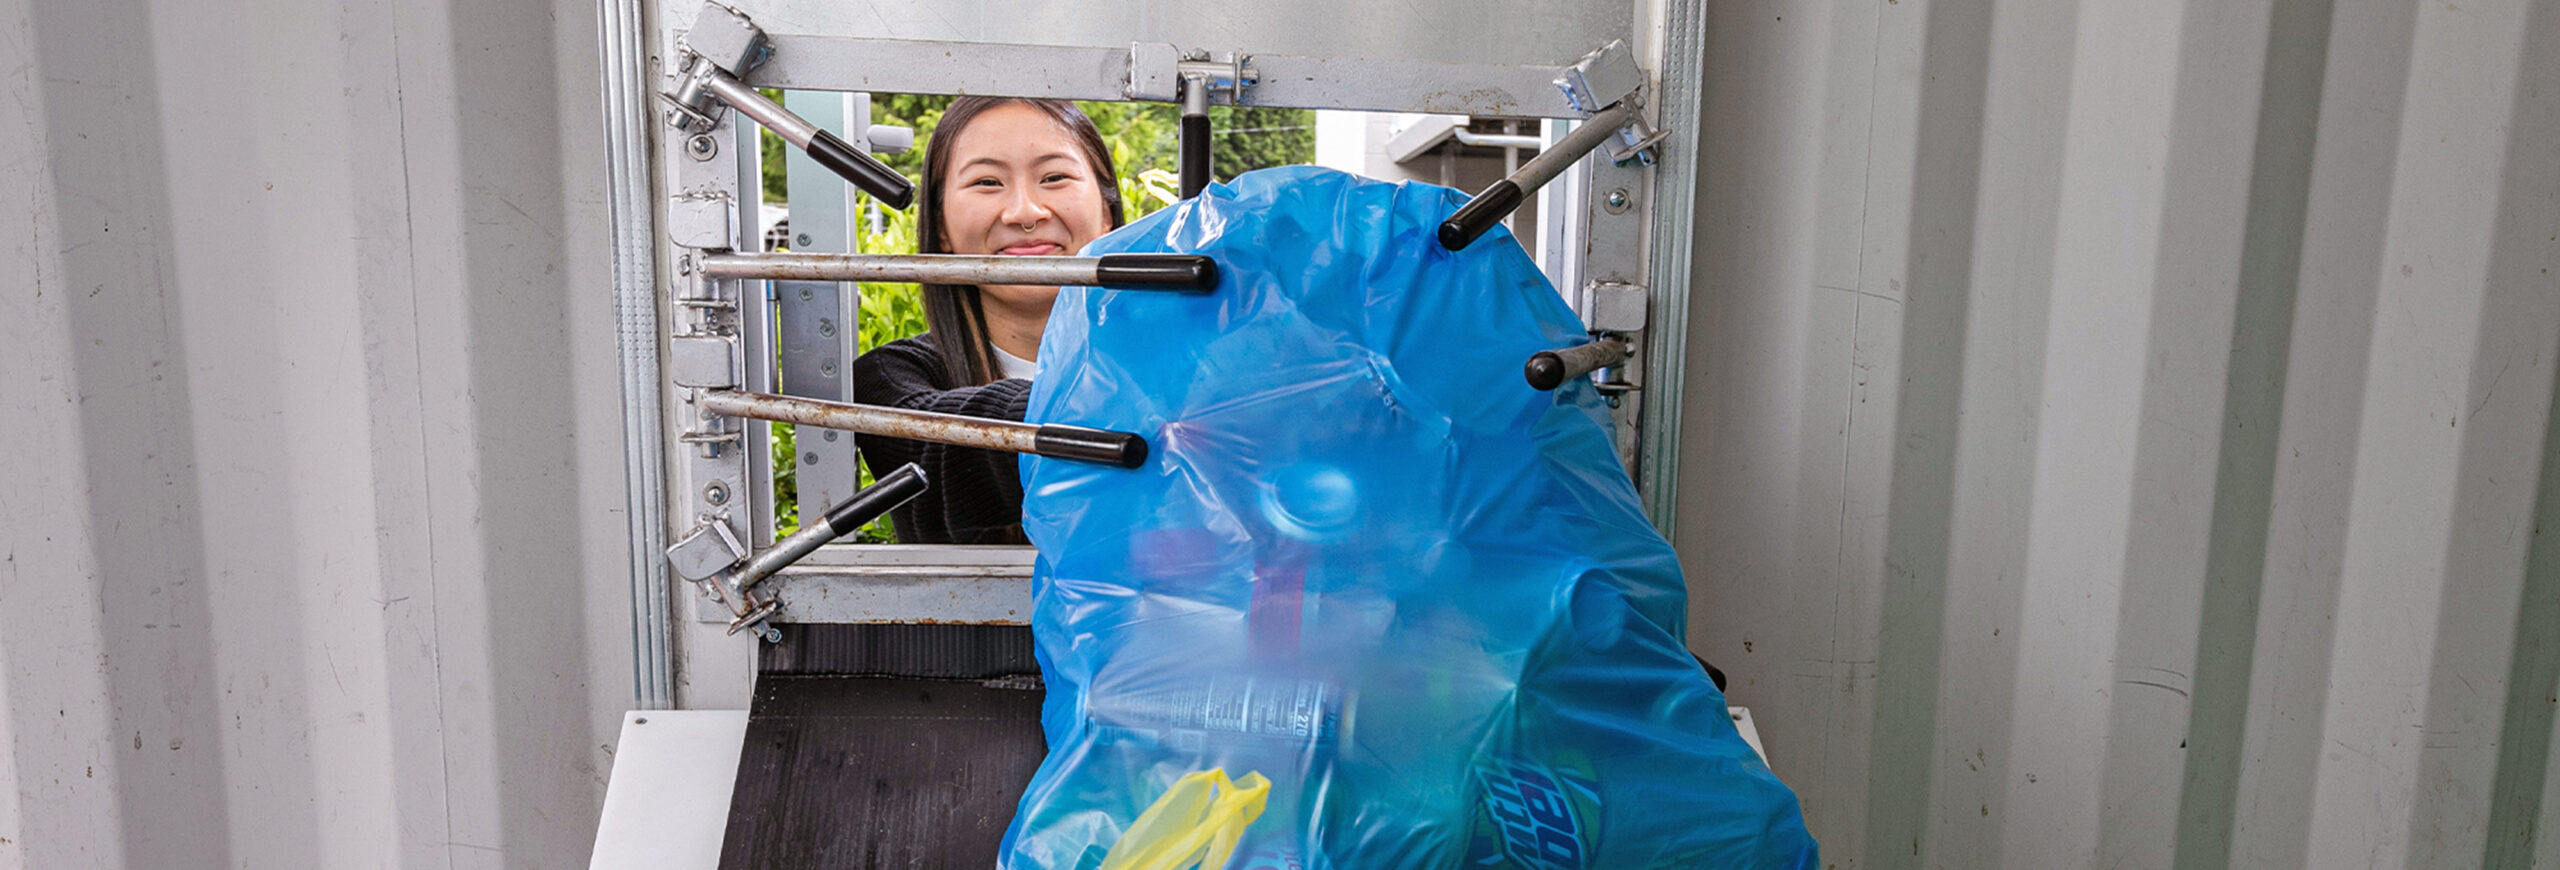 Young woman pushing a blue bag full of recyclable containers into a collection chute.